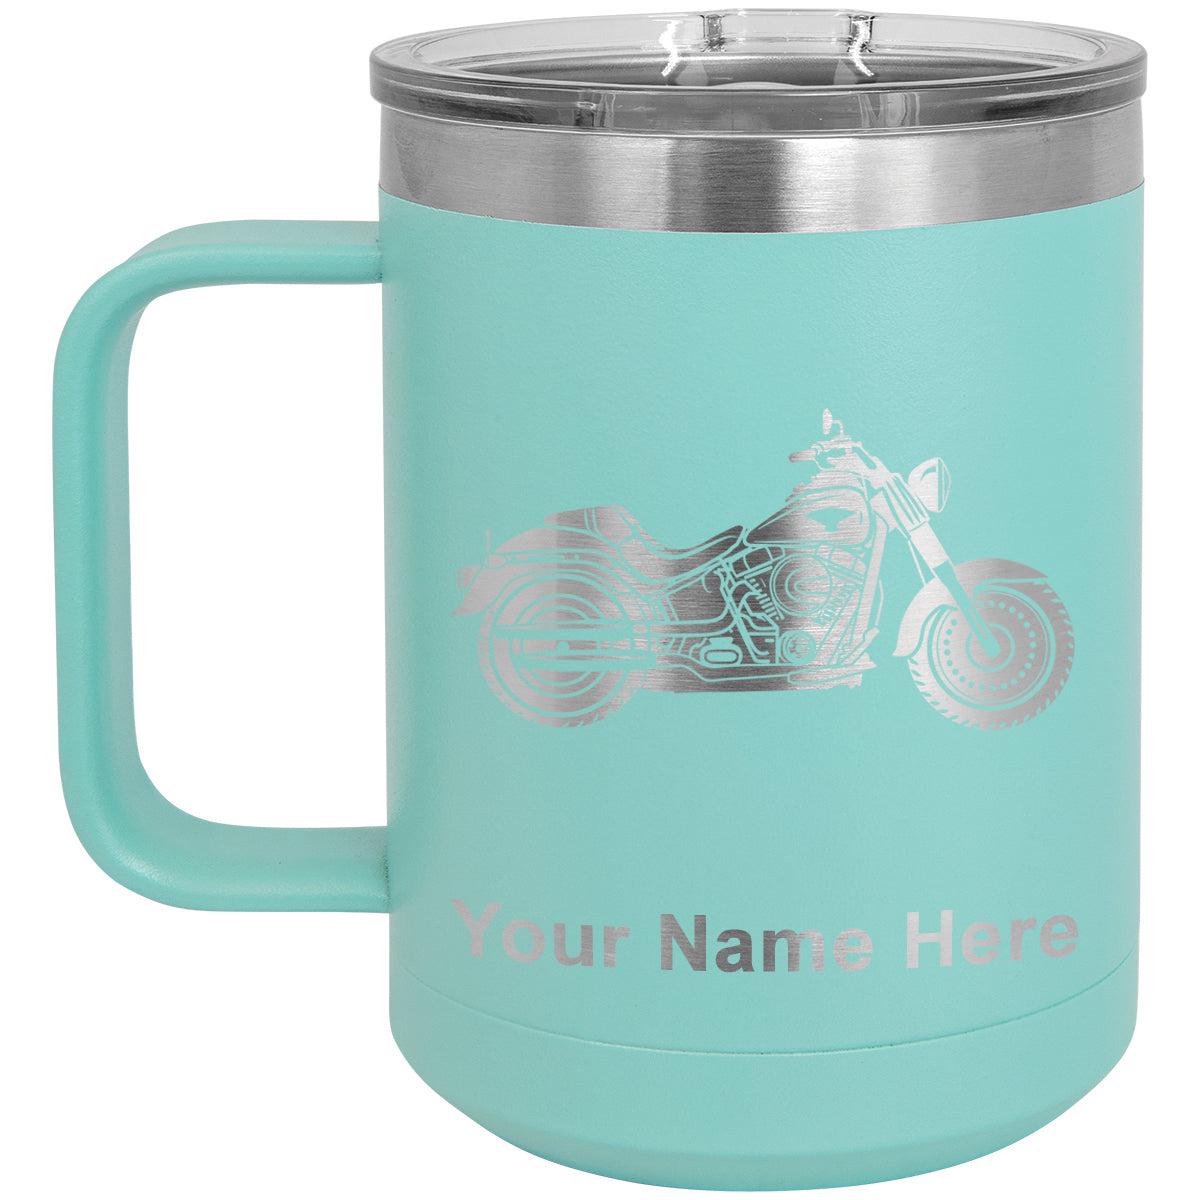 15oz Vacuum Insulated Coffee Mug, Motorcycle, Personalized Engraving Included